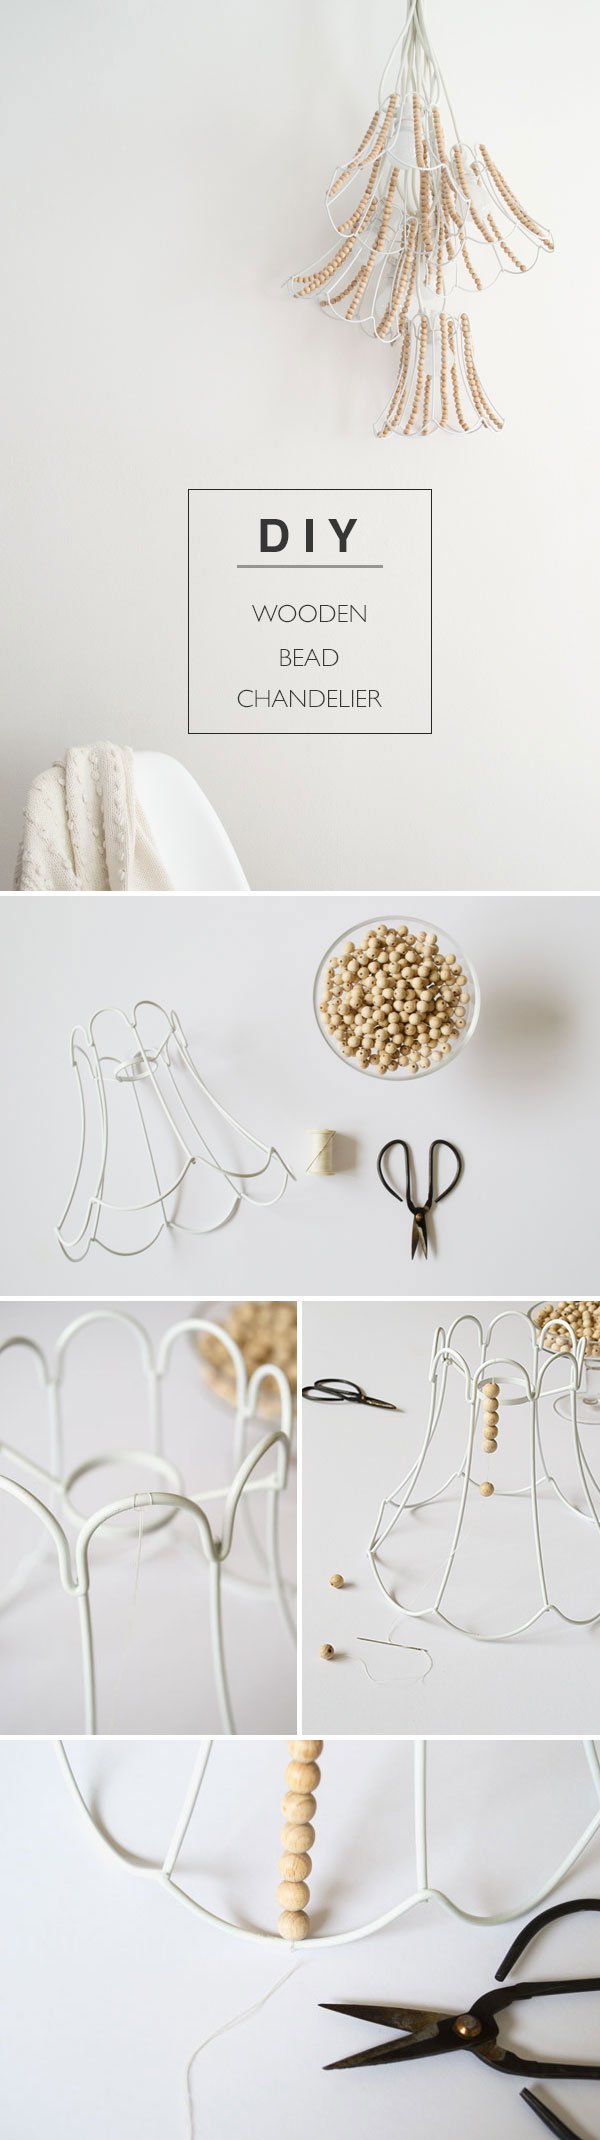 DIY_Wooden_Bead_Chandelier_Seletti_Out_There_Interiors_Winter_Lighting